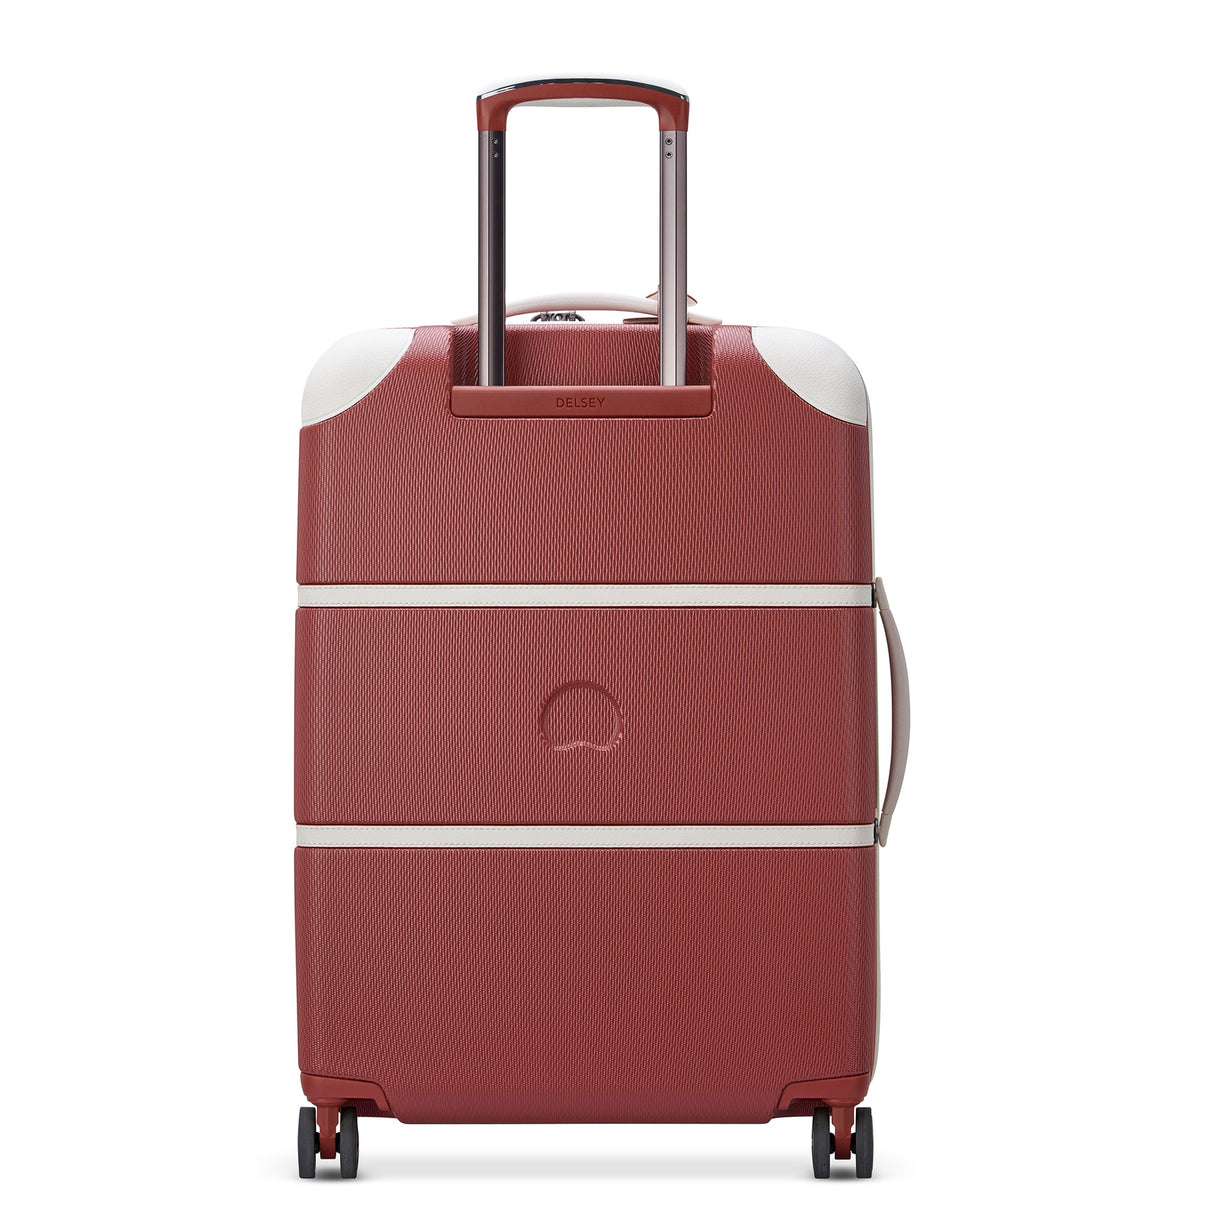 Delsey Chatelet Air 2.0 Checked 24" Spinner , , delsey-chatelet-air-2.0-40167681035RG-12_1800x1800_48a3fbfa-40bf-4267-a342-6ce118fe19db